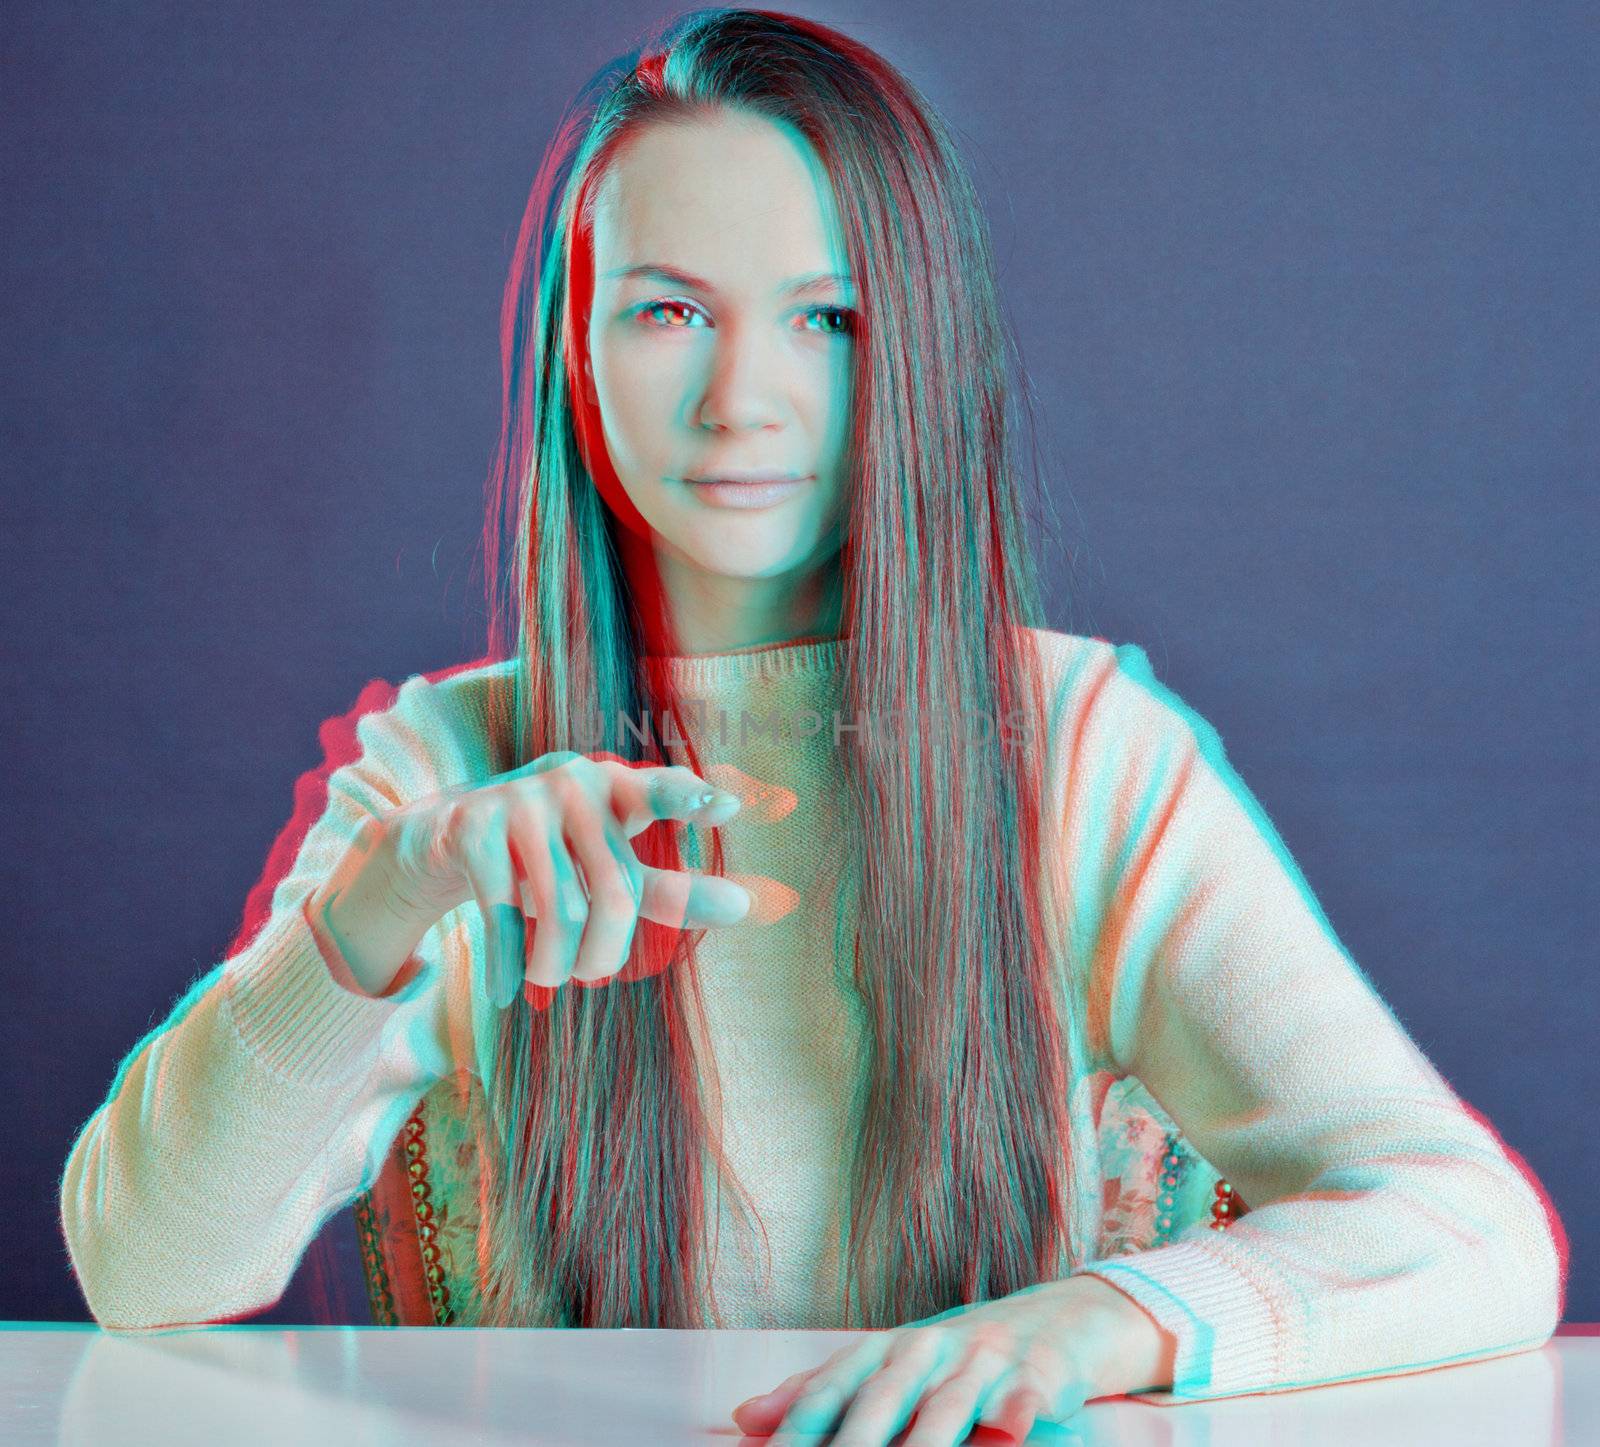 beautiful woman 3d photo (need 3d anaglyph glasses to take effect)